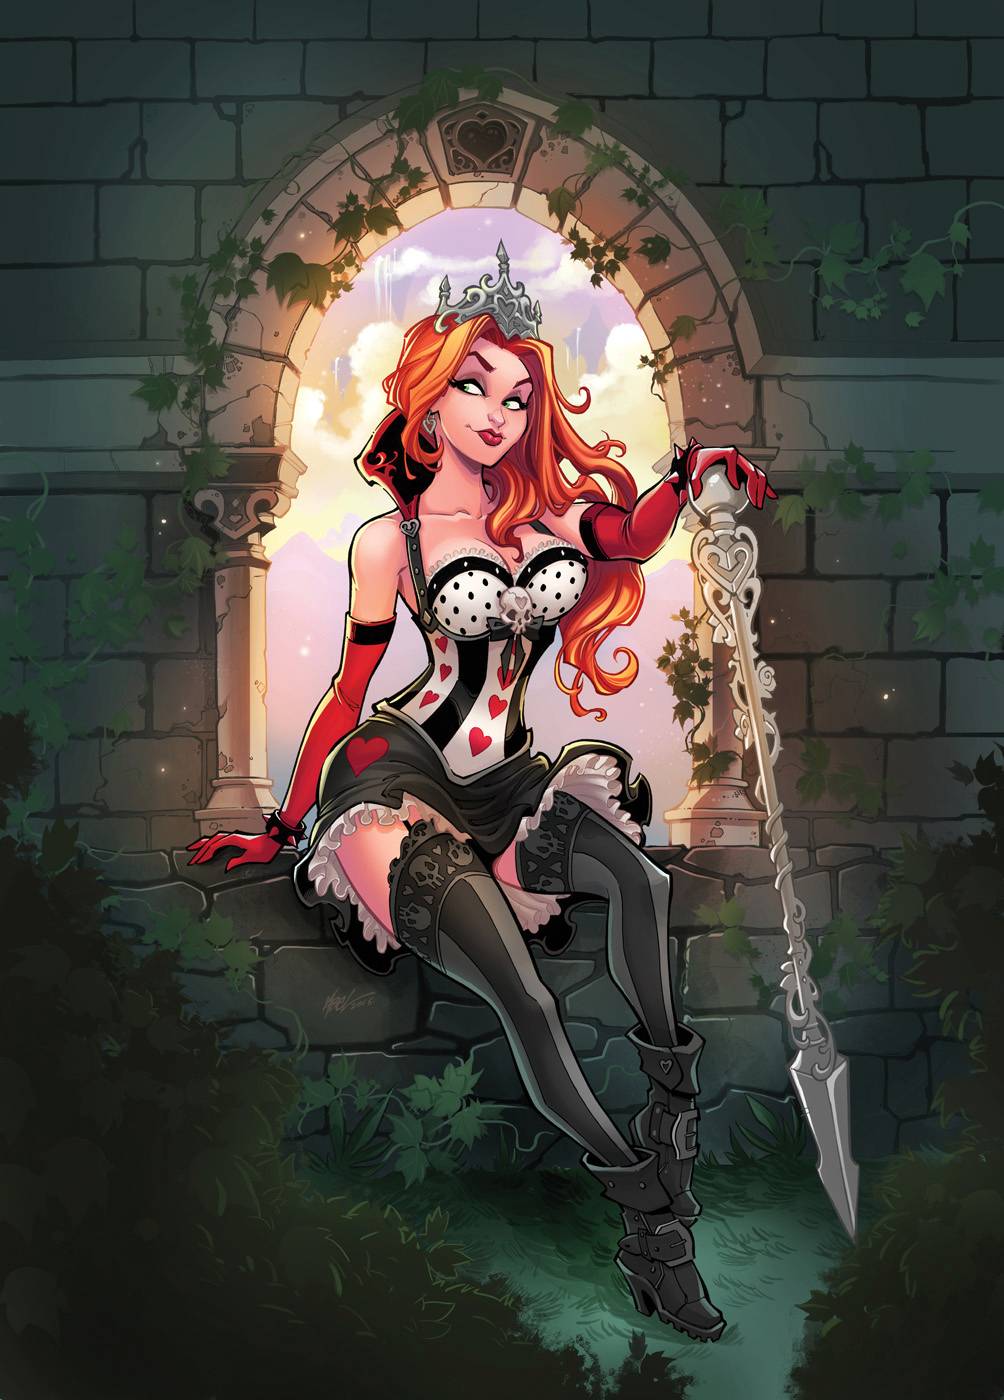 Best Grim Fairy Tale Images On Pinterest Sexy Drawings Sexy Cartoons And Cartoon Girls